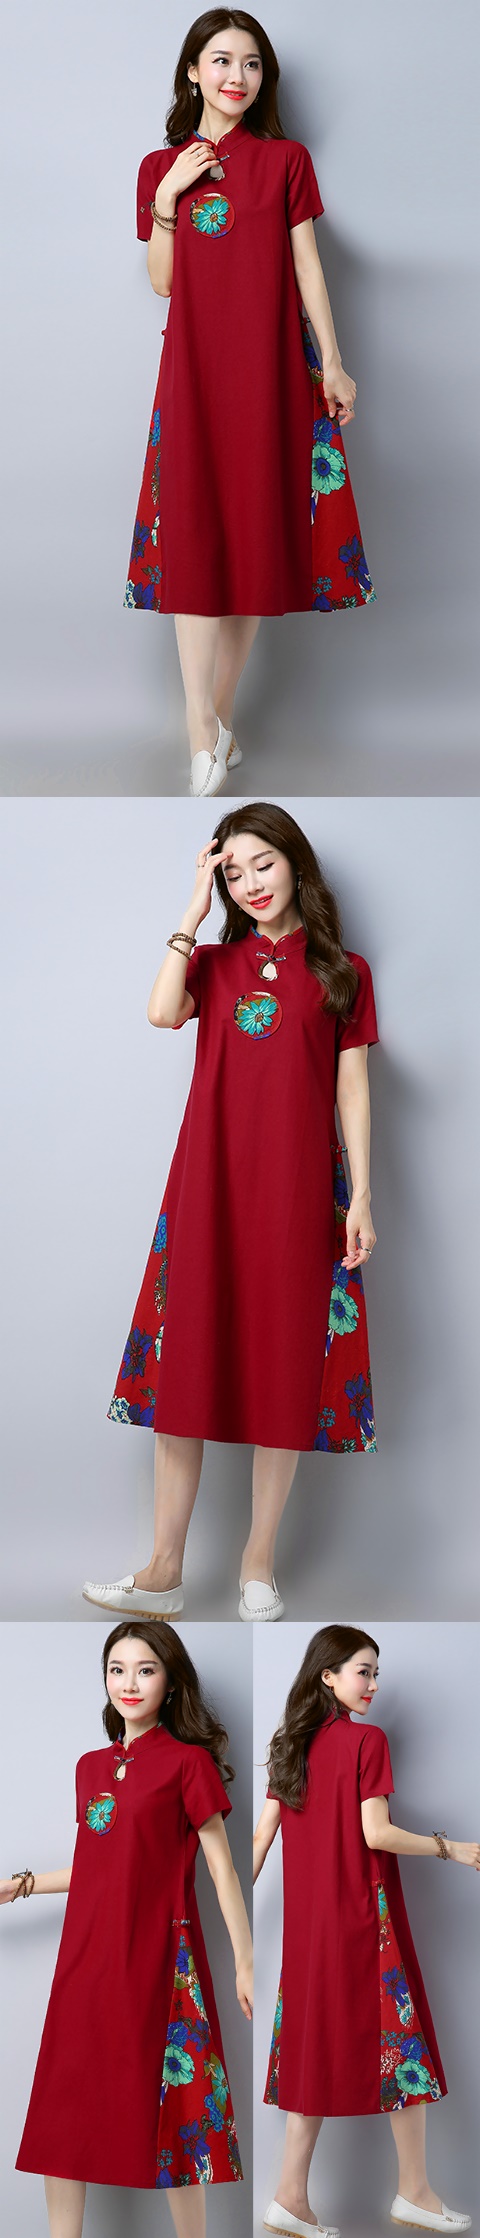 Ethnic Mid-length Dress with patches-Burgundy (RM)